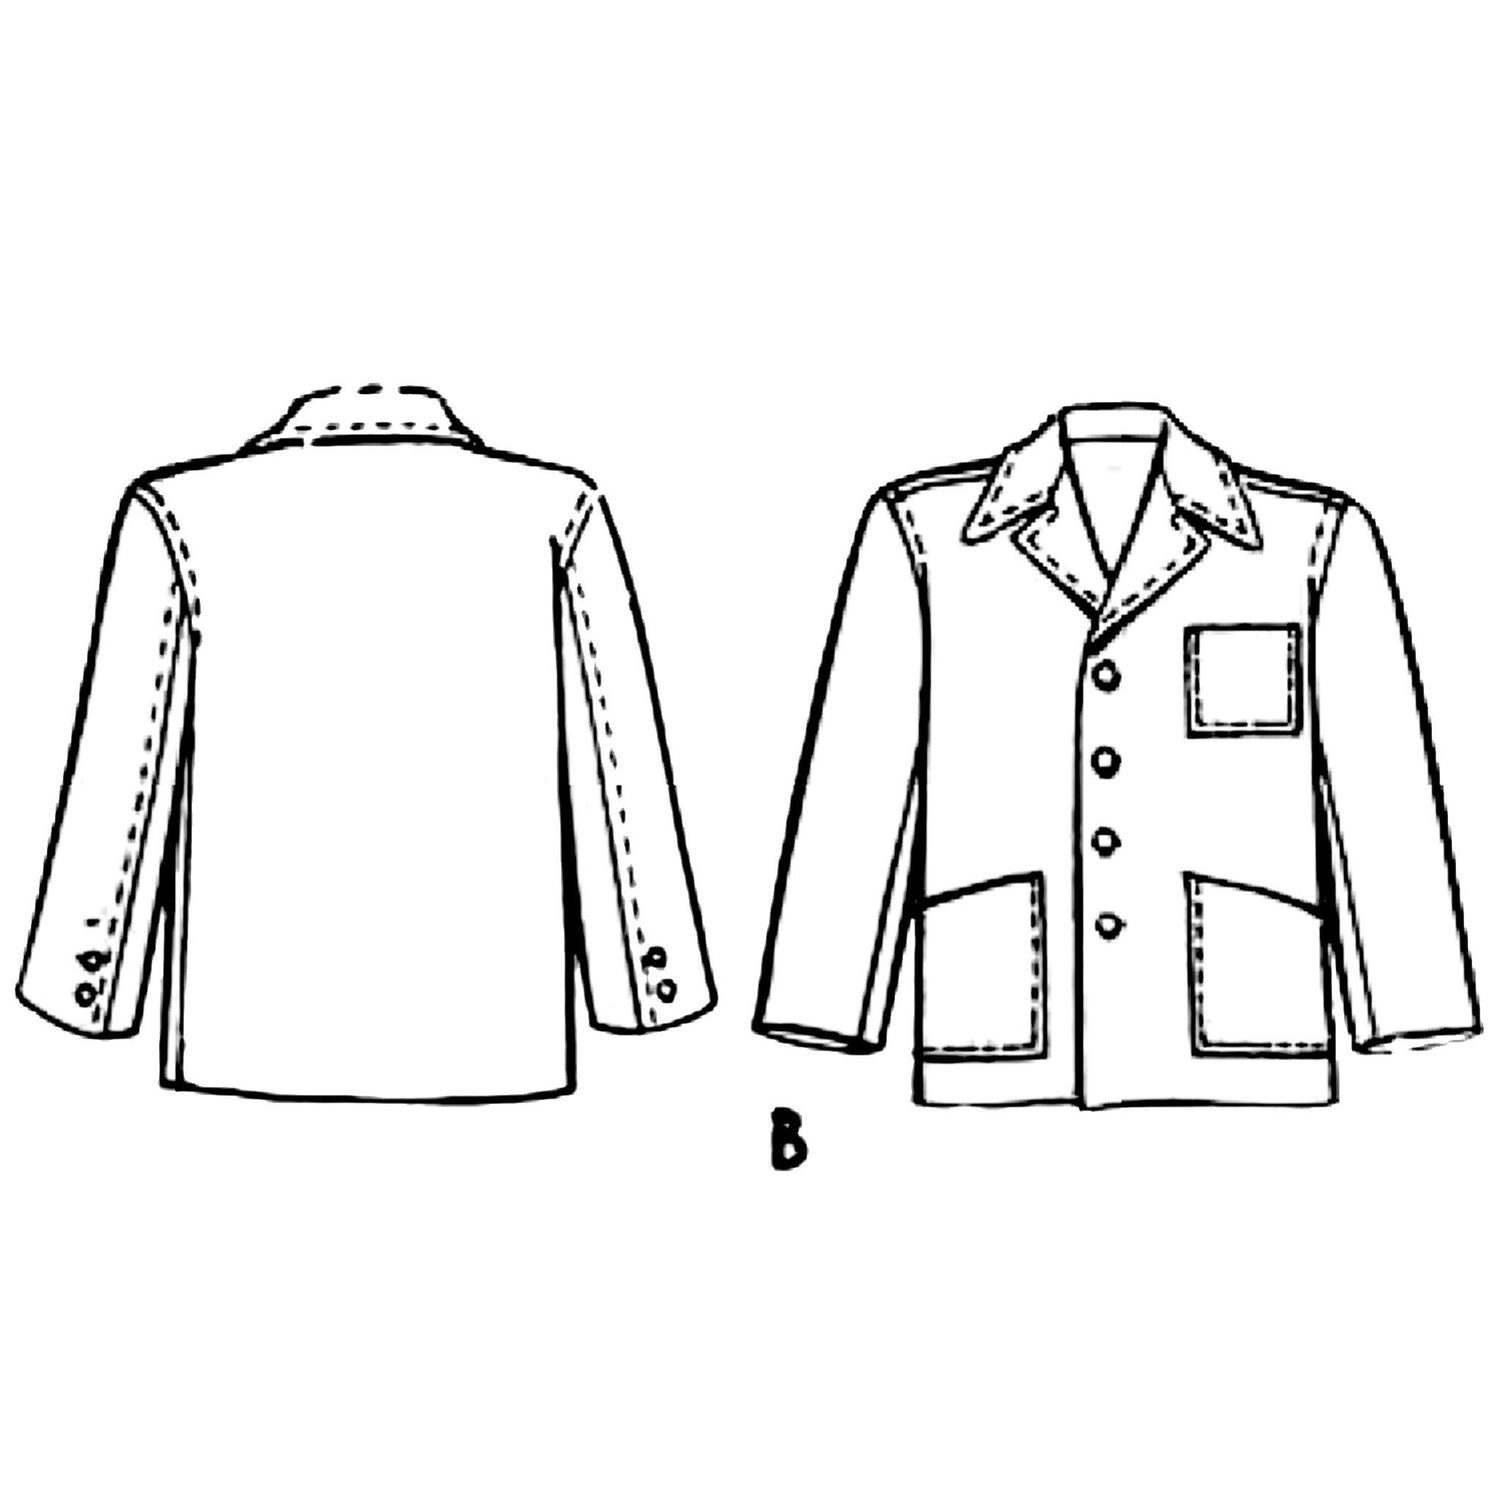 Line drawing of View B front and back